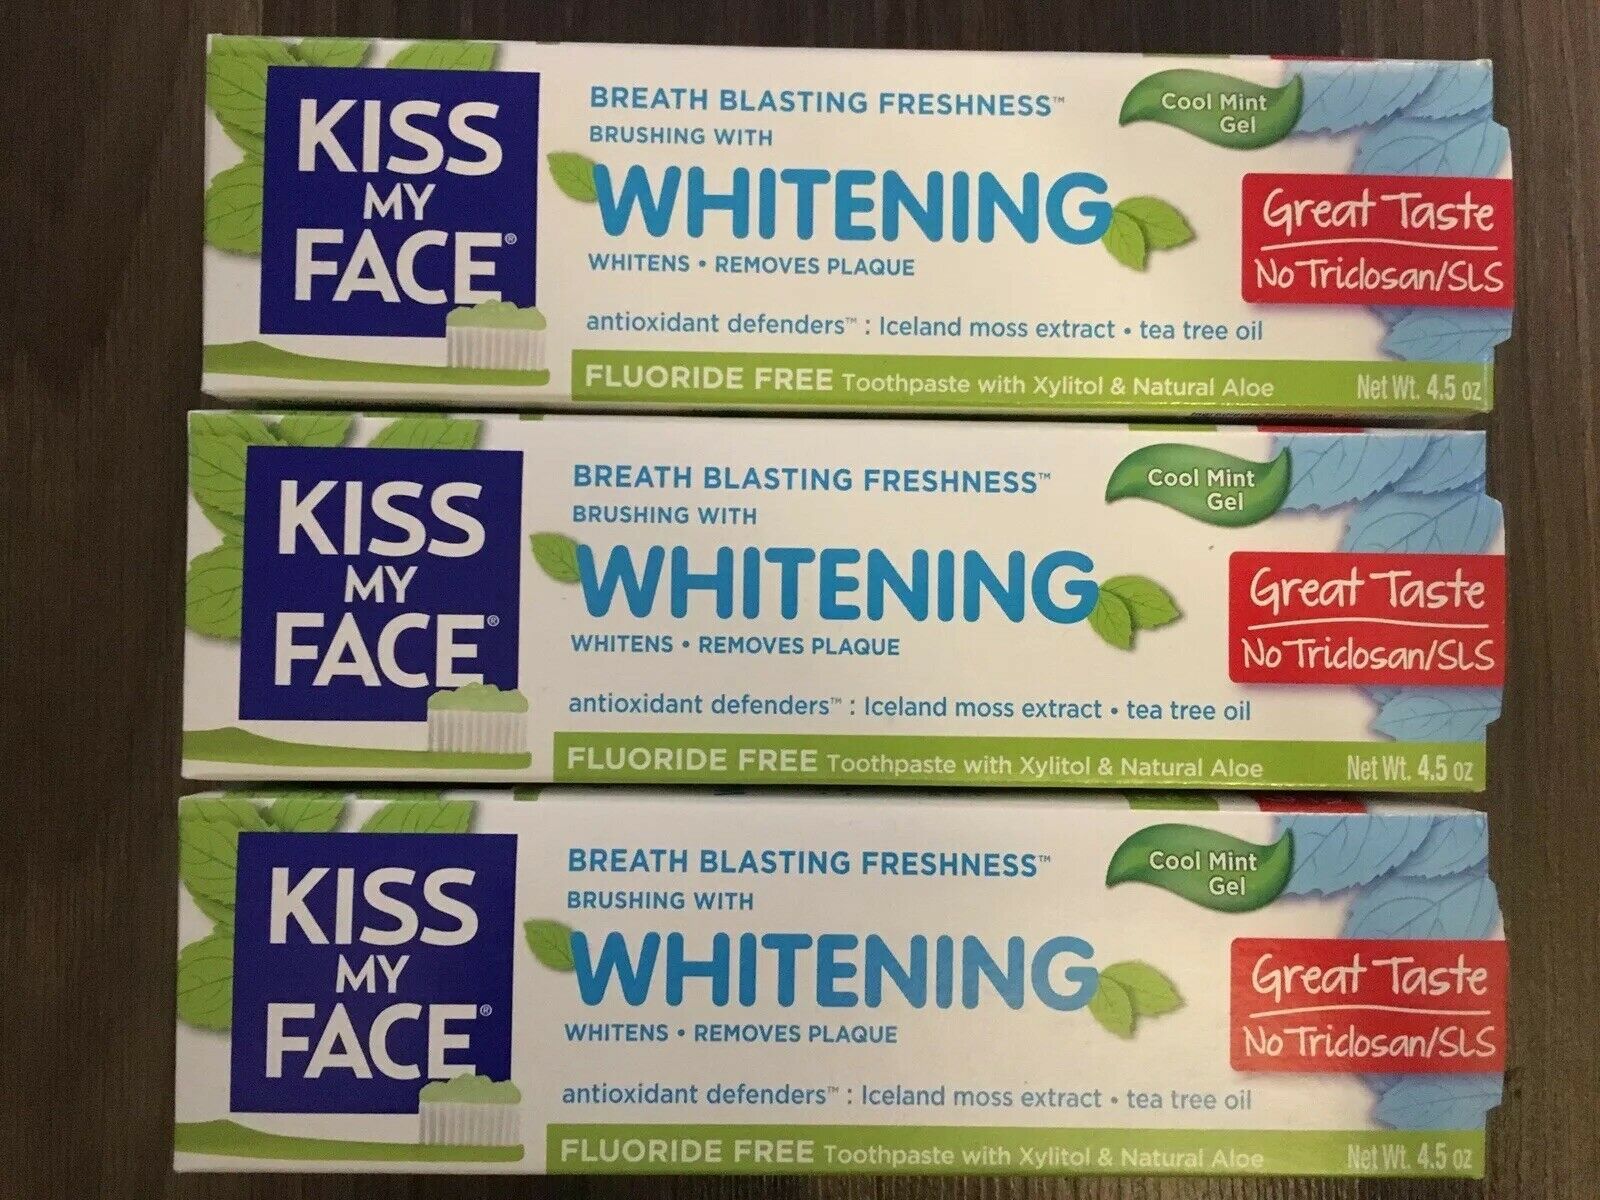 Lot Of 3 Kiss My Face Whitening Fluoride Free Toothpaste Cool Mint Gel 4.5 oz - $40.02